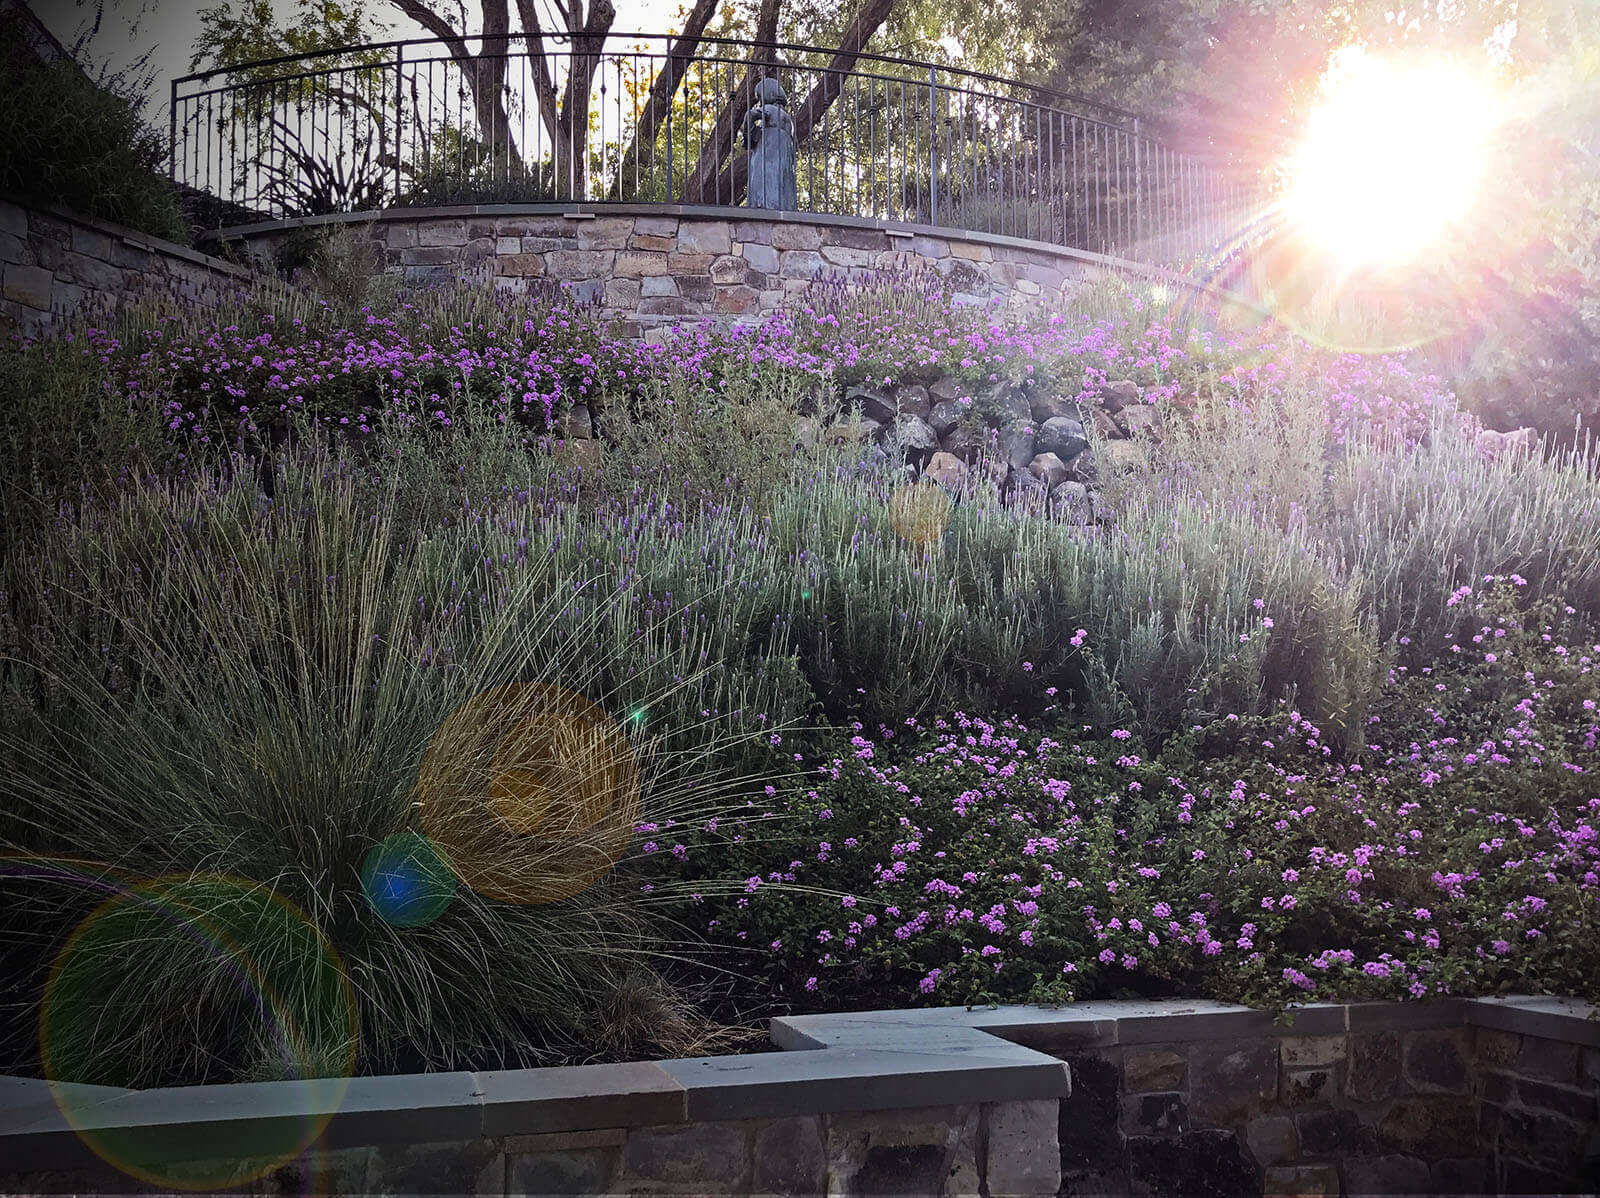 Lavender, among many purple flowers and a tall grass in a staged garden with stone walls